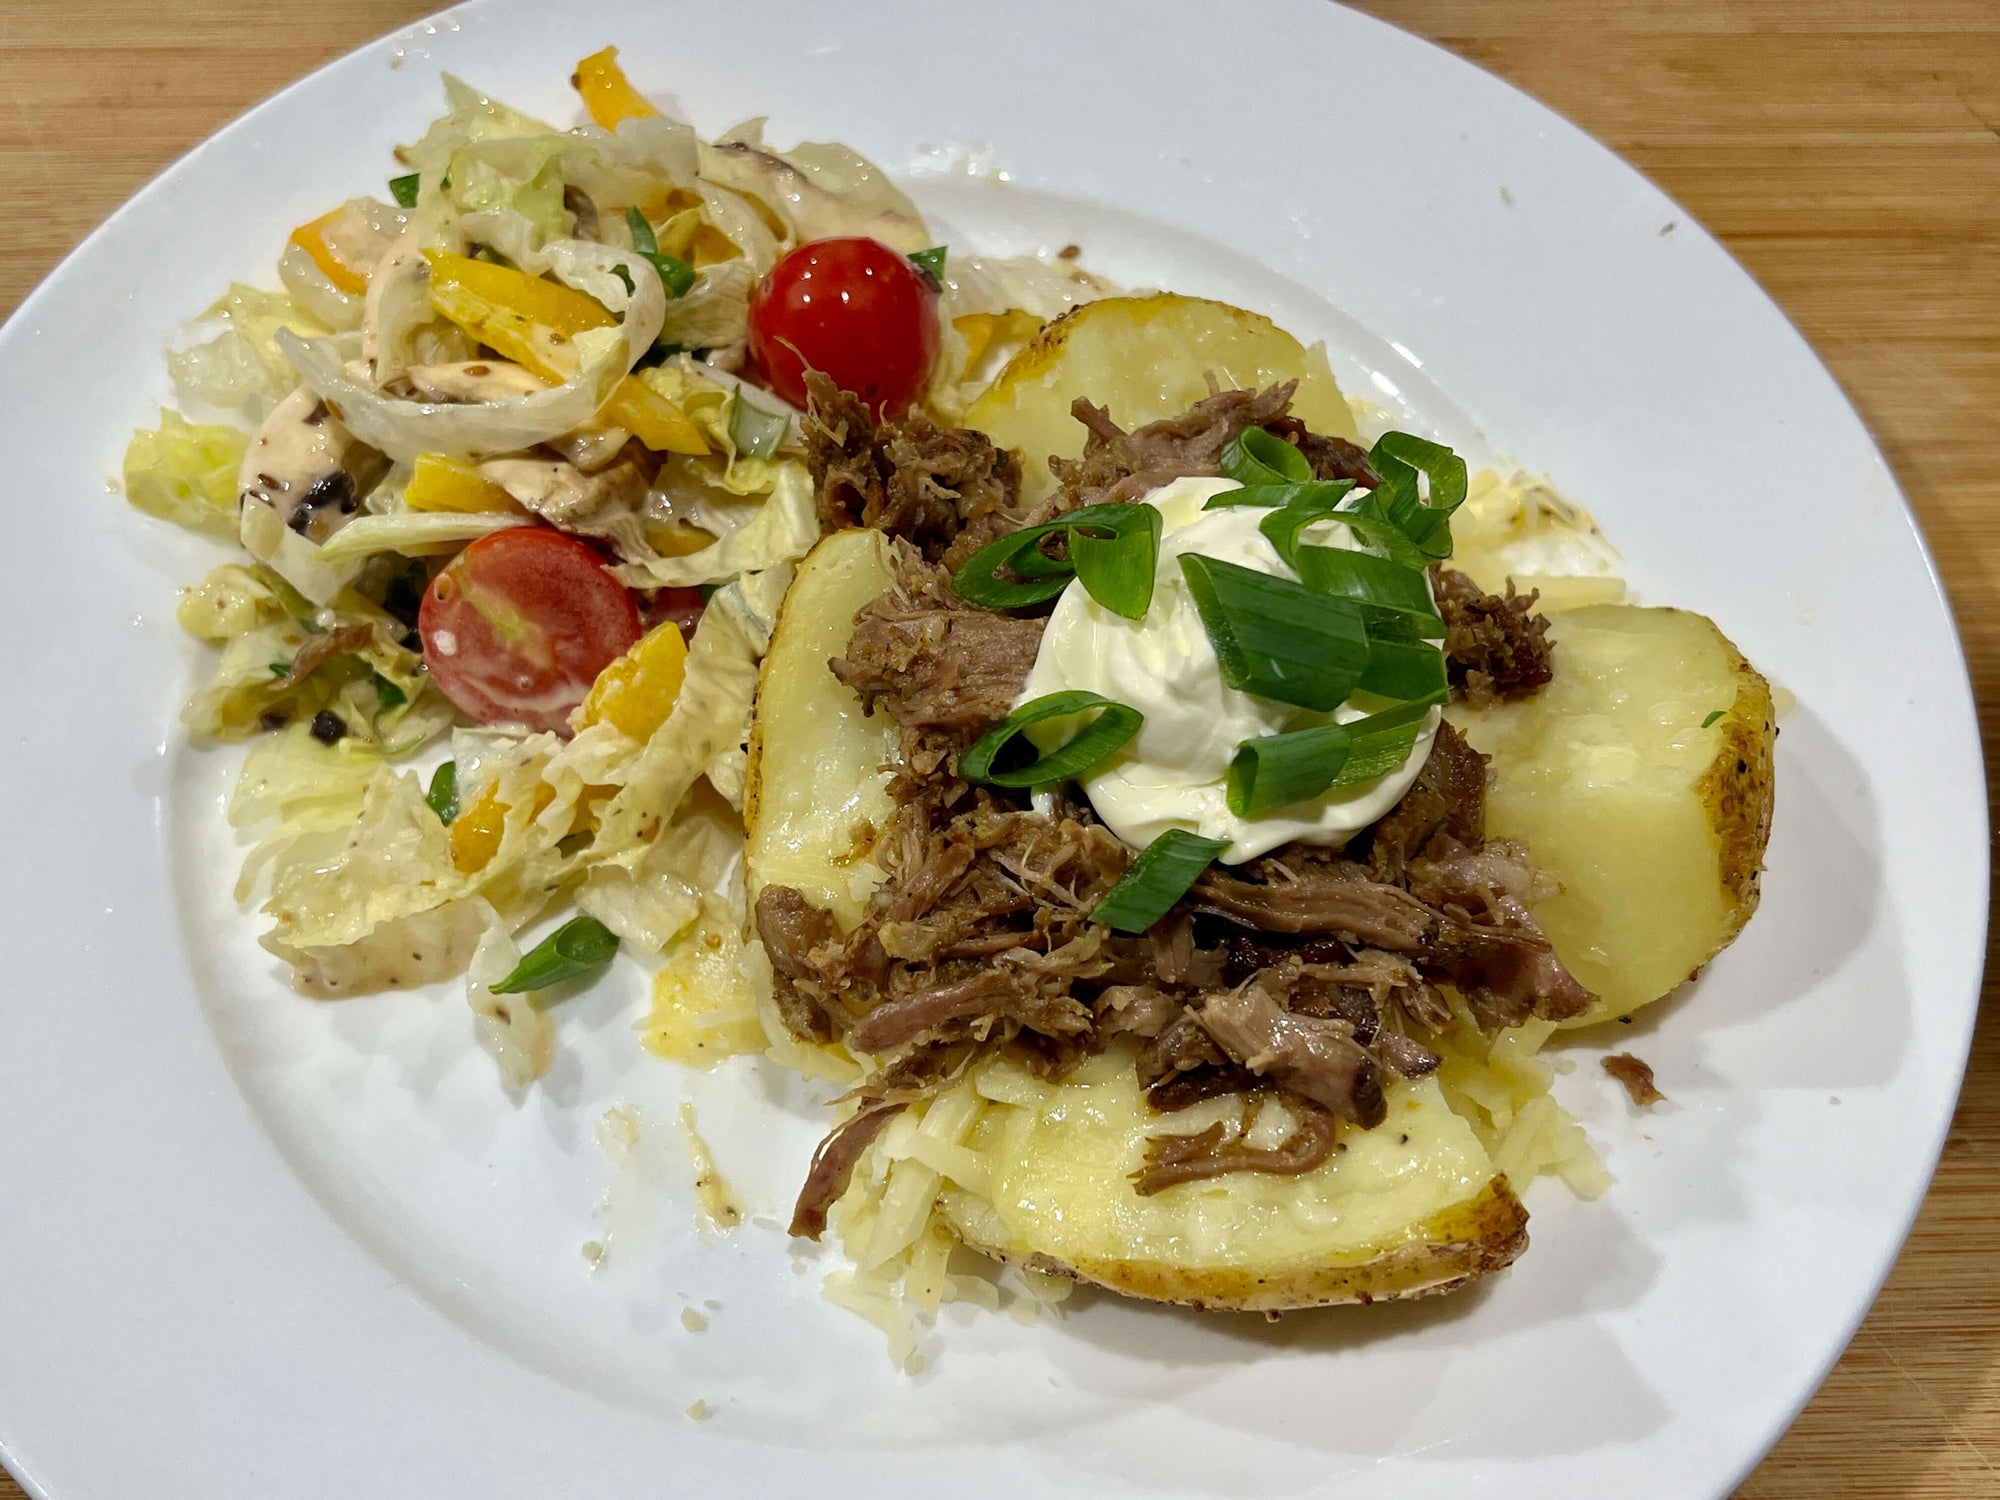 Baked Potato with Pulled Lamb & Cowboy Butter, <$6.50 per person!